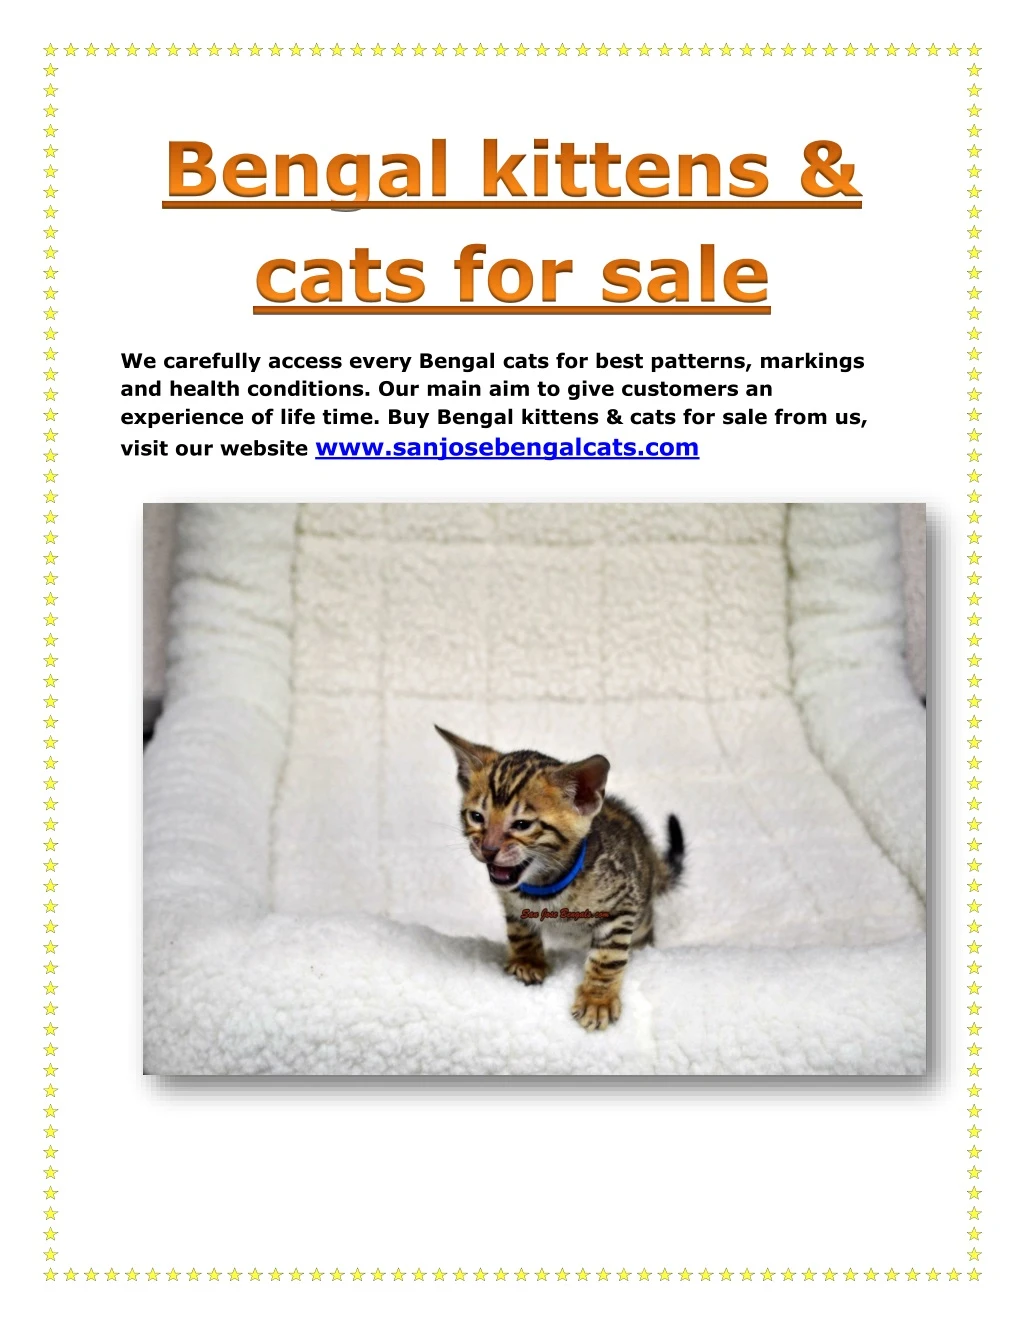 we carefully access every bengal cats for best